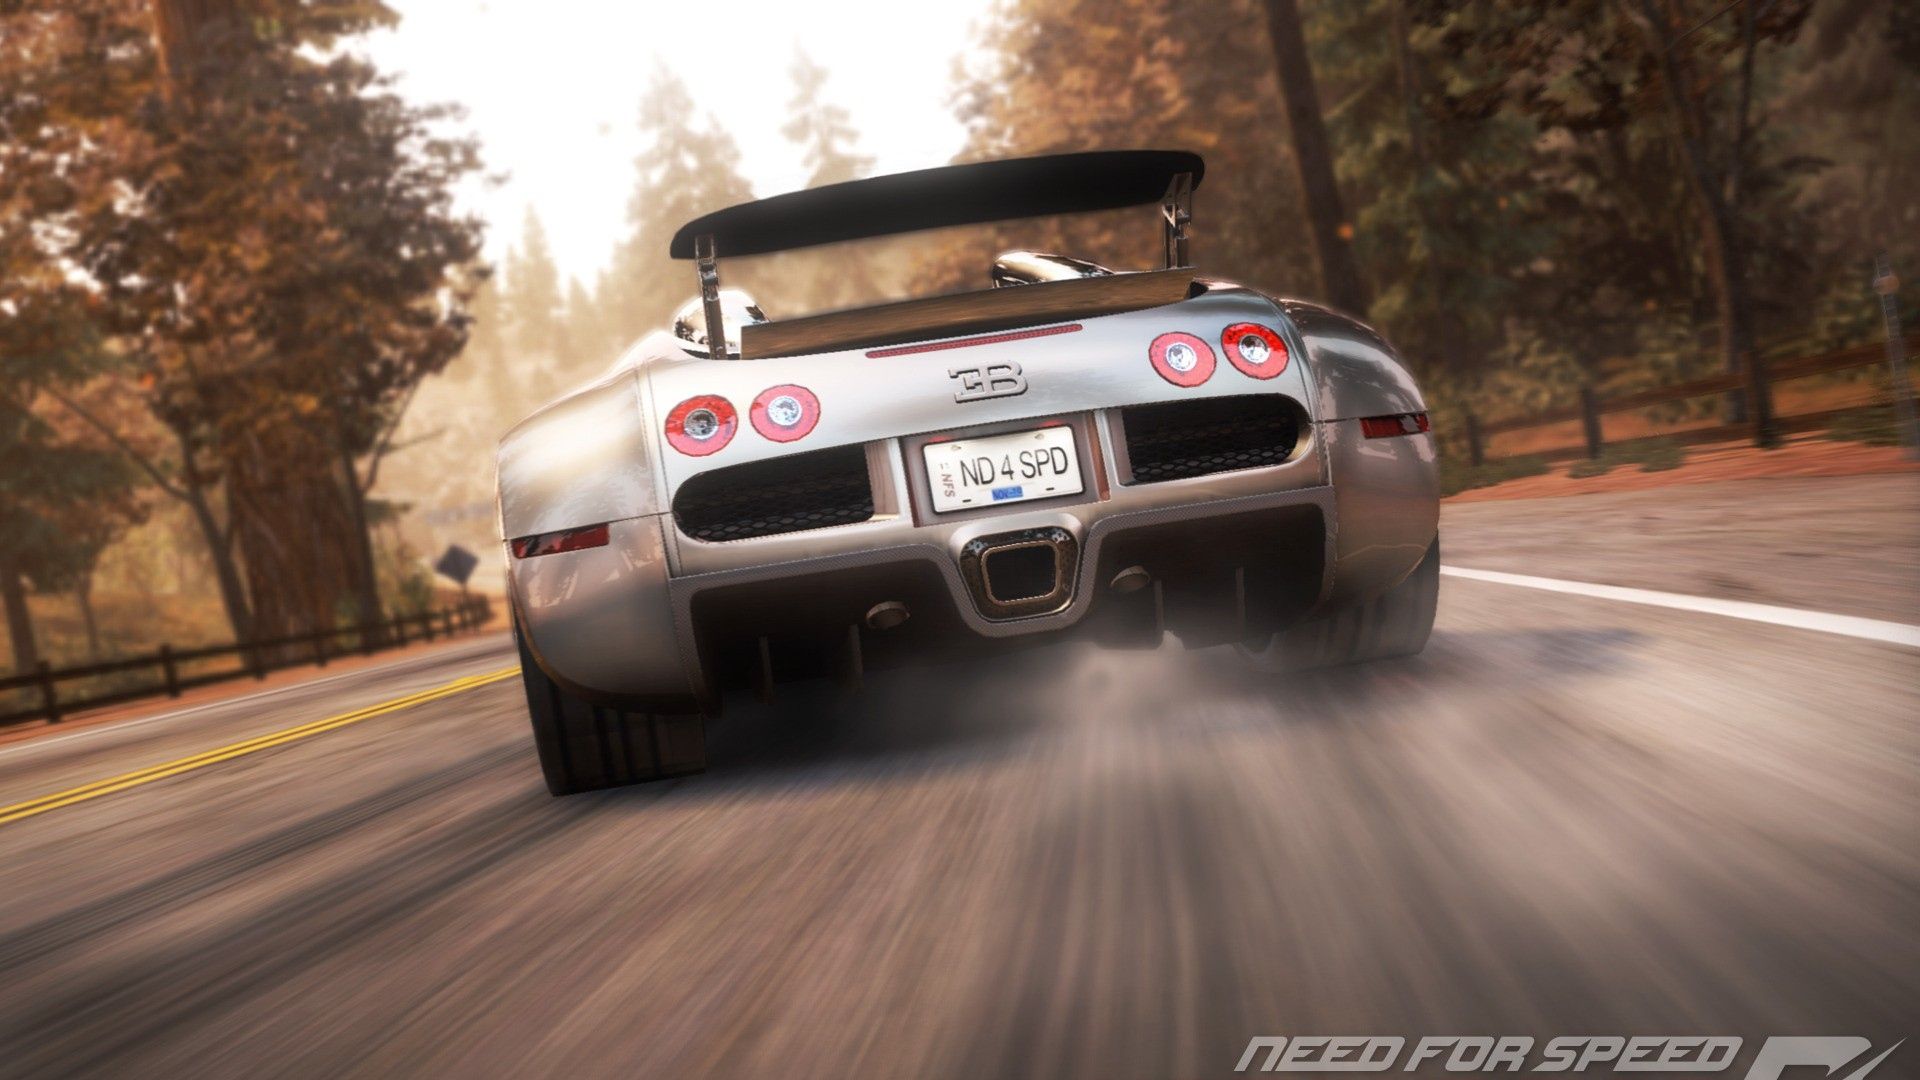 Download Wallpaper 1920x1080 nfs, need for speed, need for speed